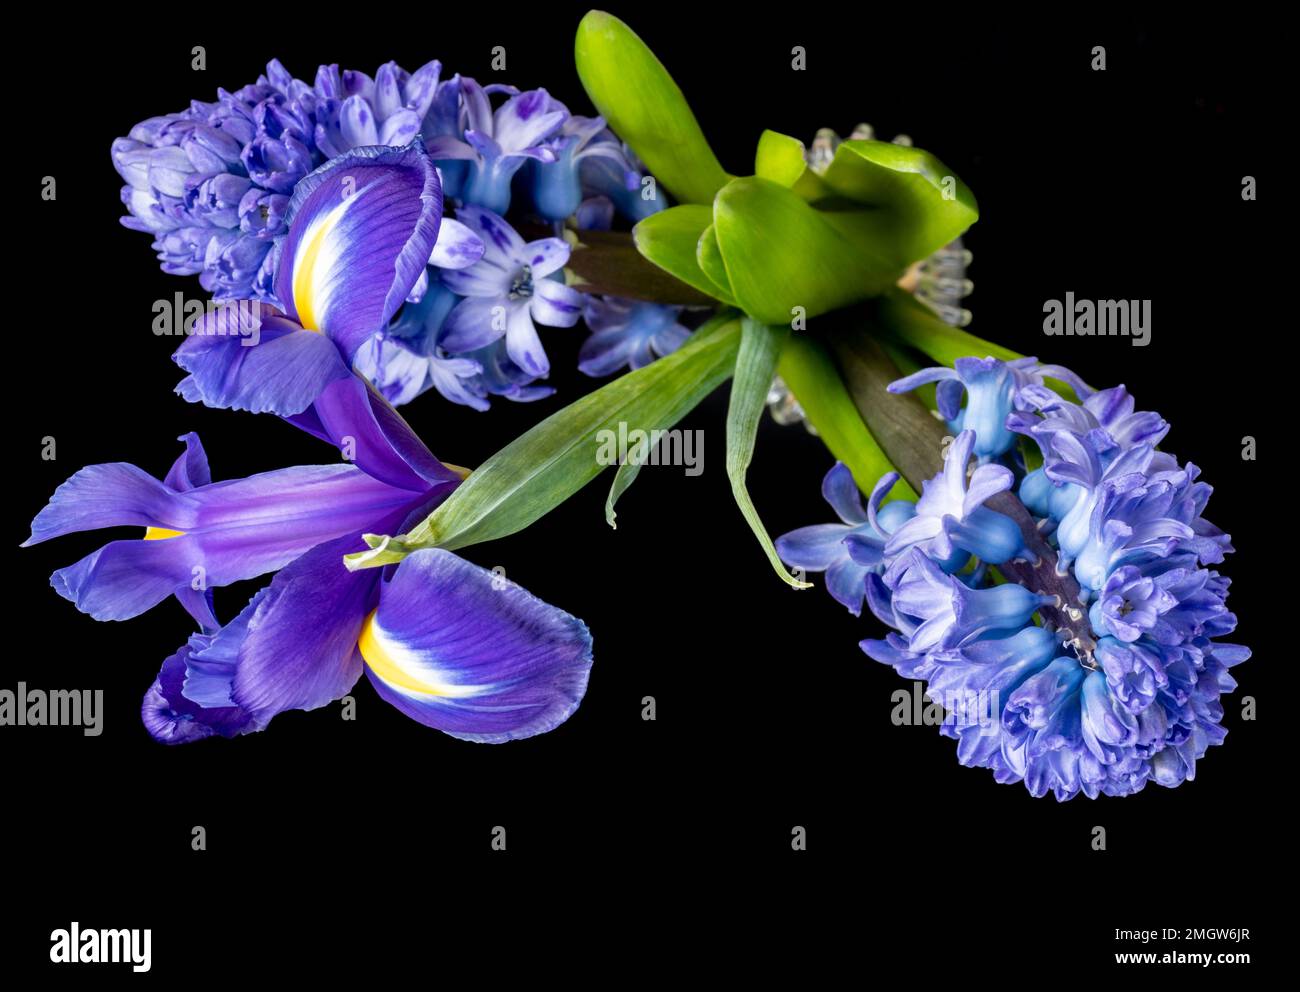 Hyacinth and Iris blossoms on a black background Stock Photo